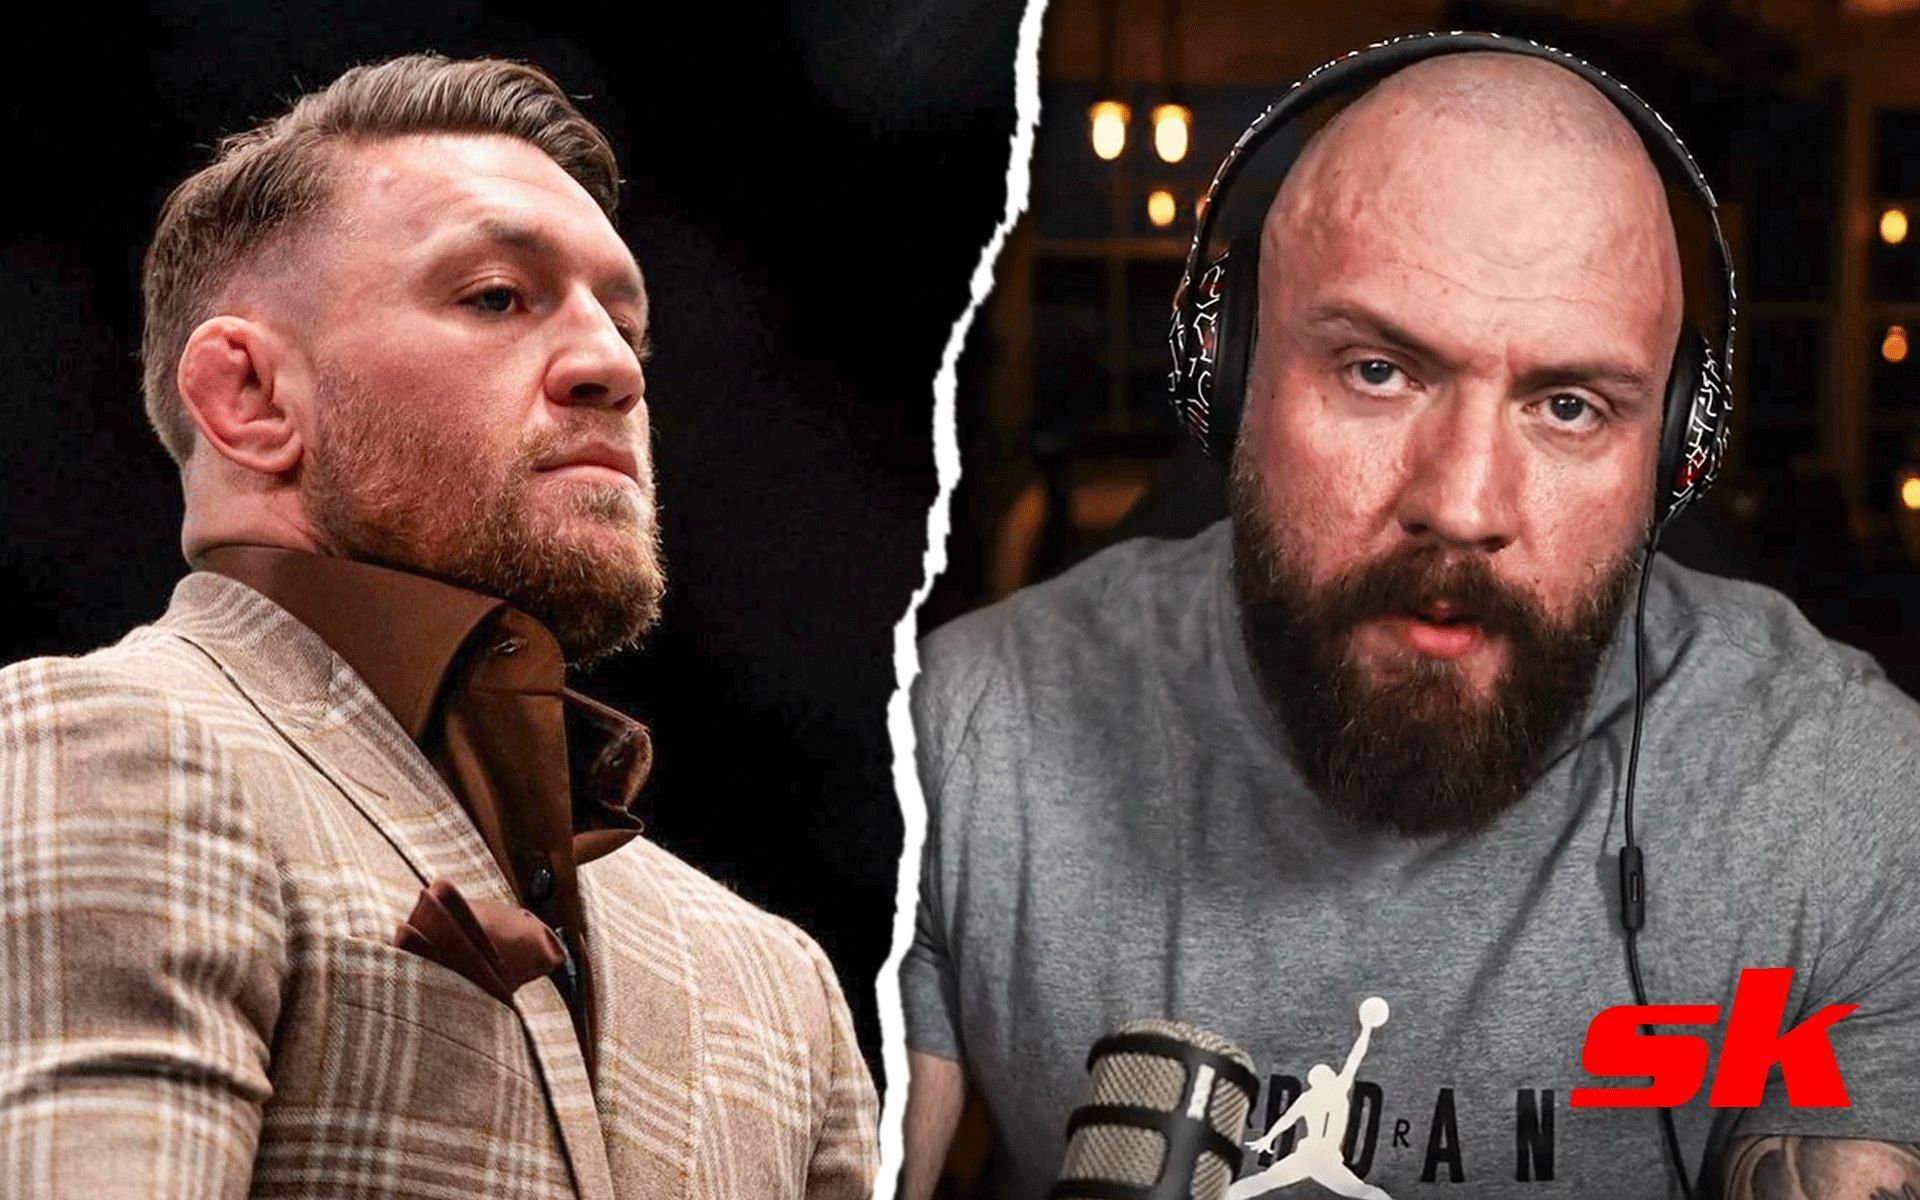 Conor McGregor (left) and True Geordie (right) [Image credits: @thenotoriousmma and @truegeordieofficial on Instagram] 